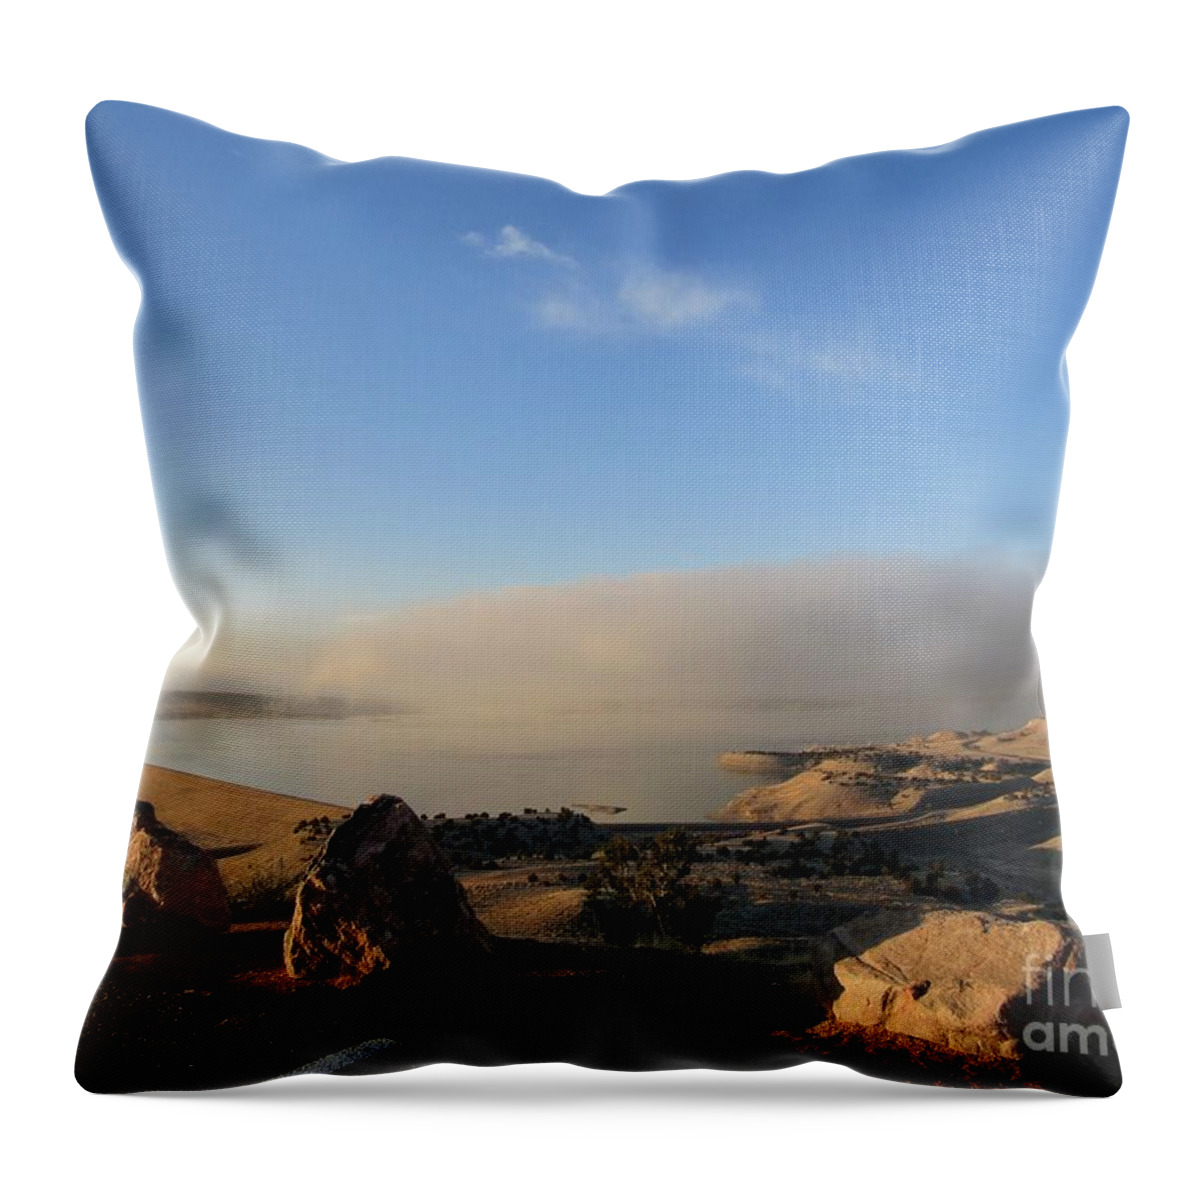 Lake Pueblo Throw Pillow featuring the photograph Good Morning Pueblo by Kelly Awad